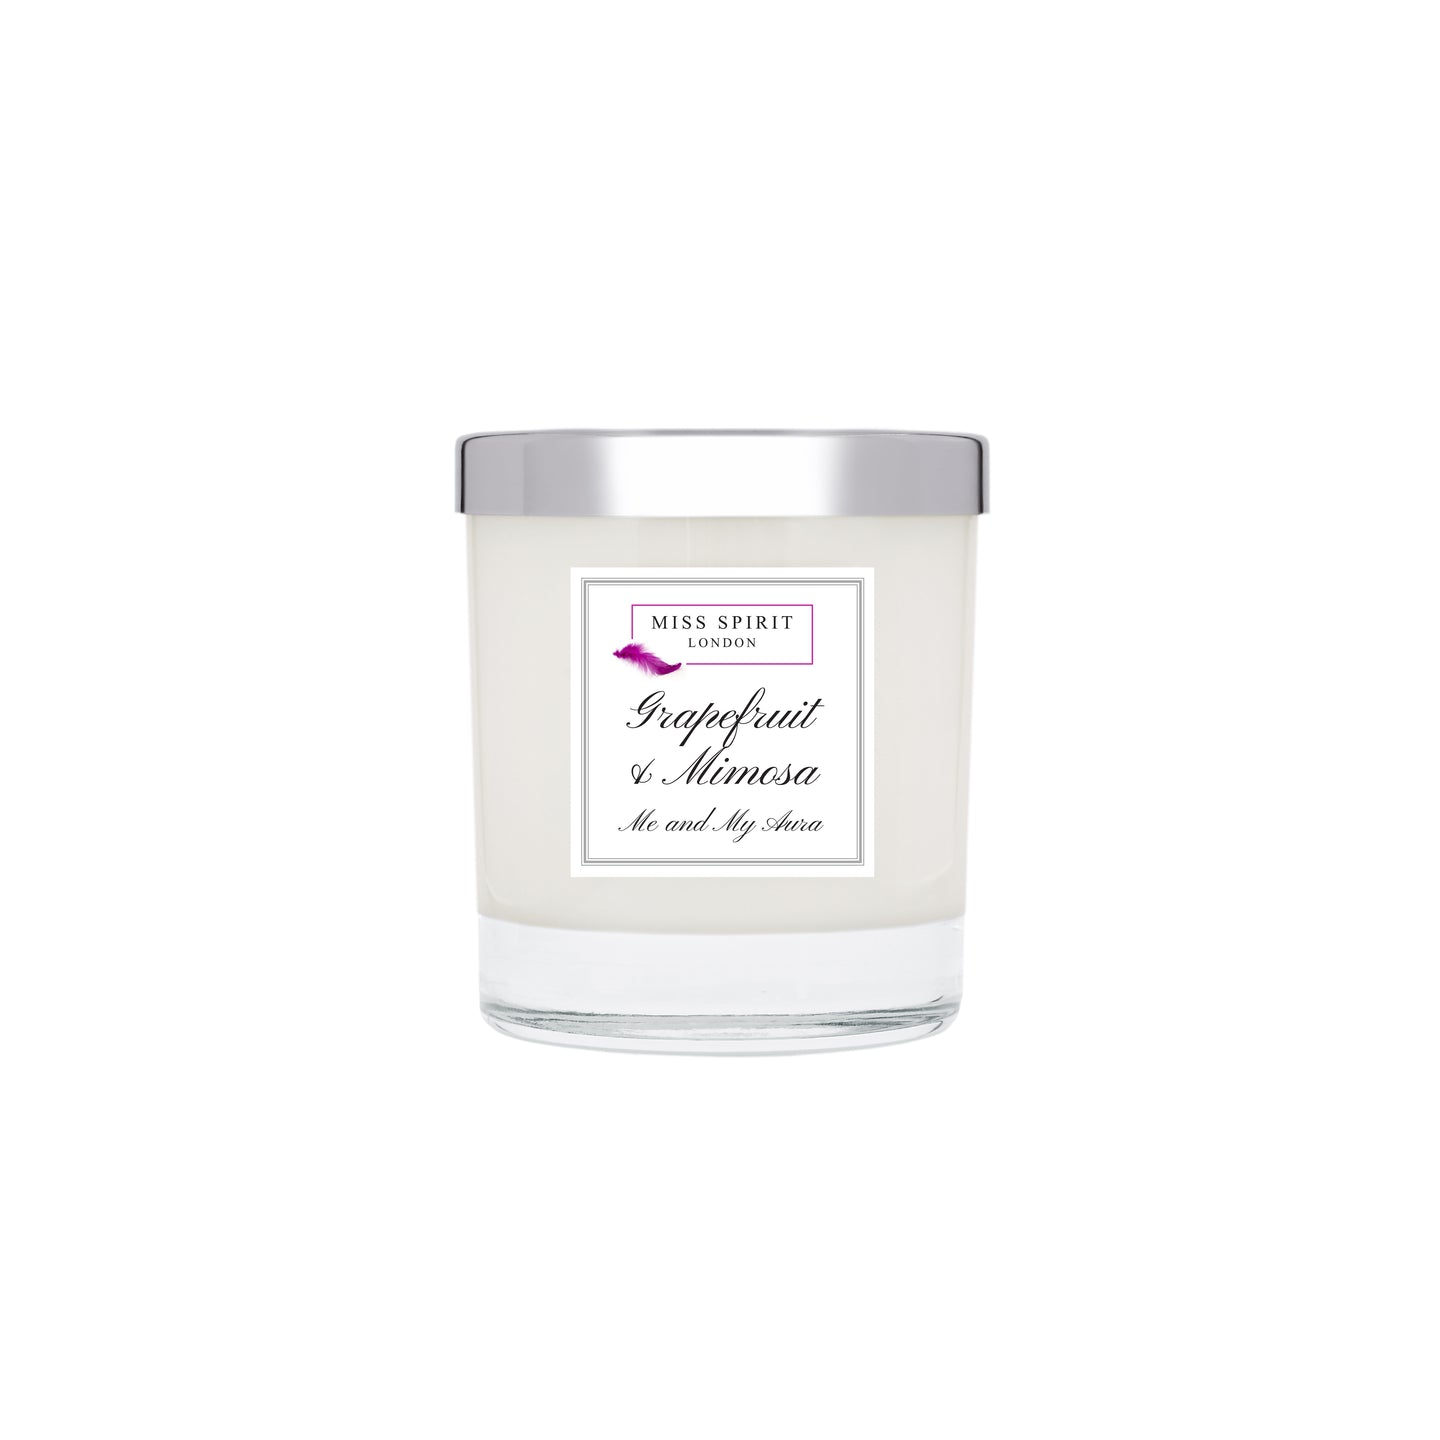 Grapefruit & Mimosa Home Candle 220gms